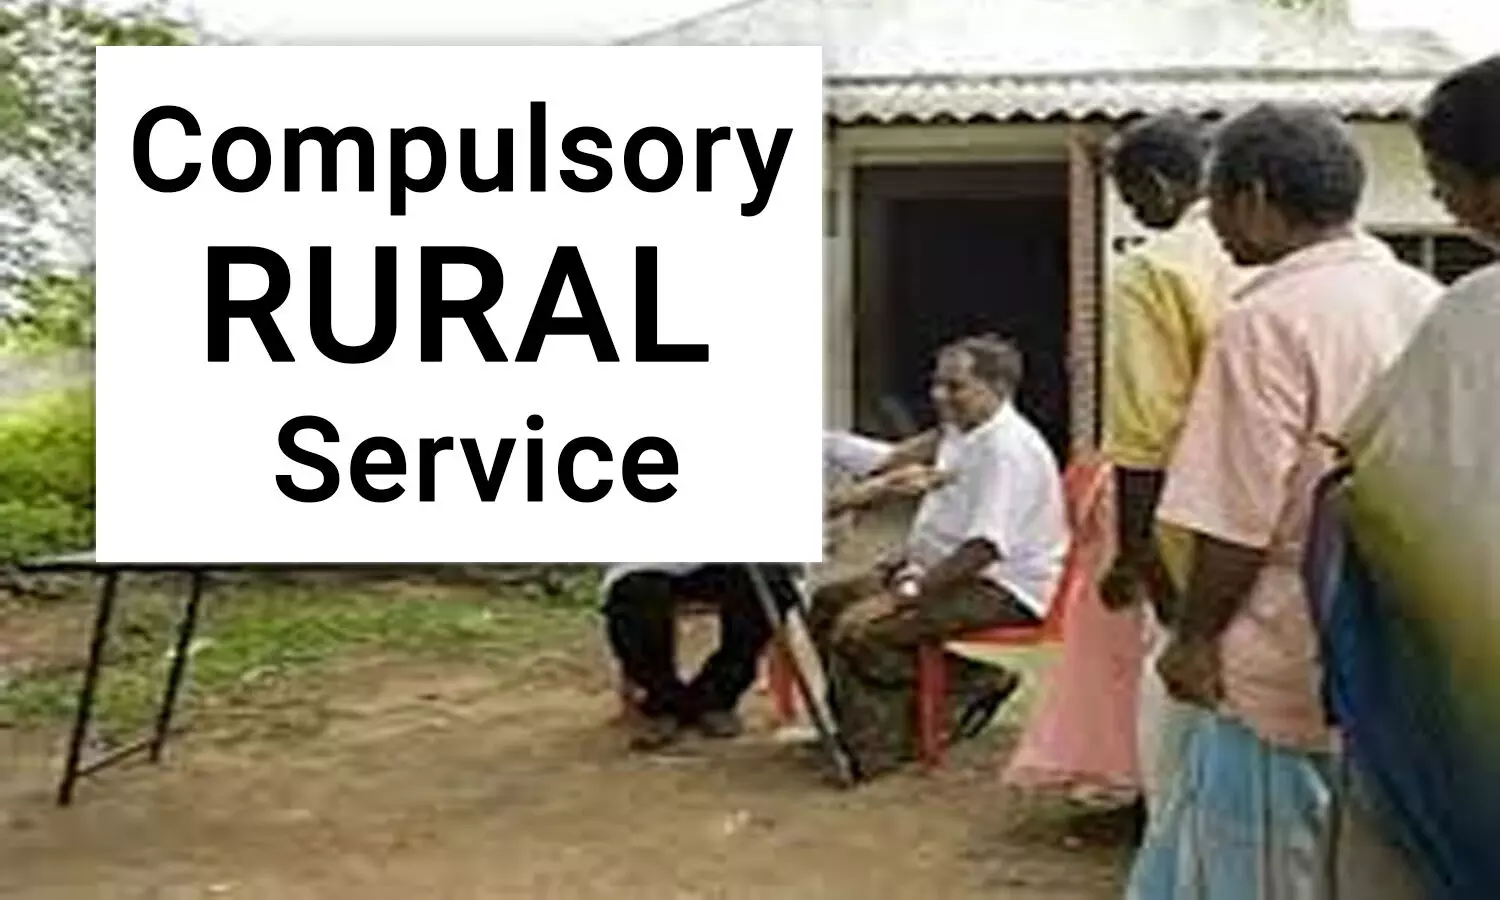 One year service in Rural, tribal areas now Mandatory for PG Medicos in Andhra Pradesh